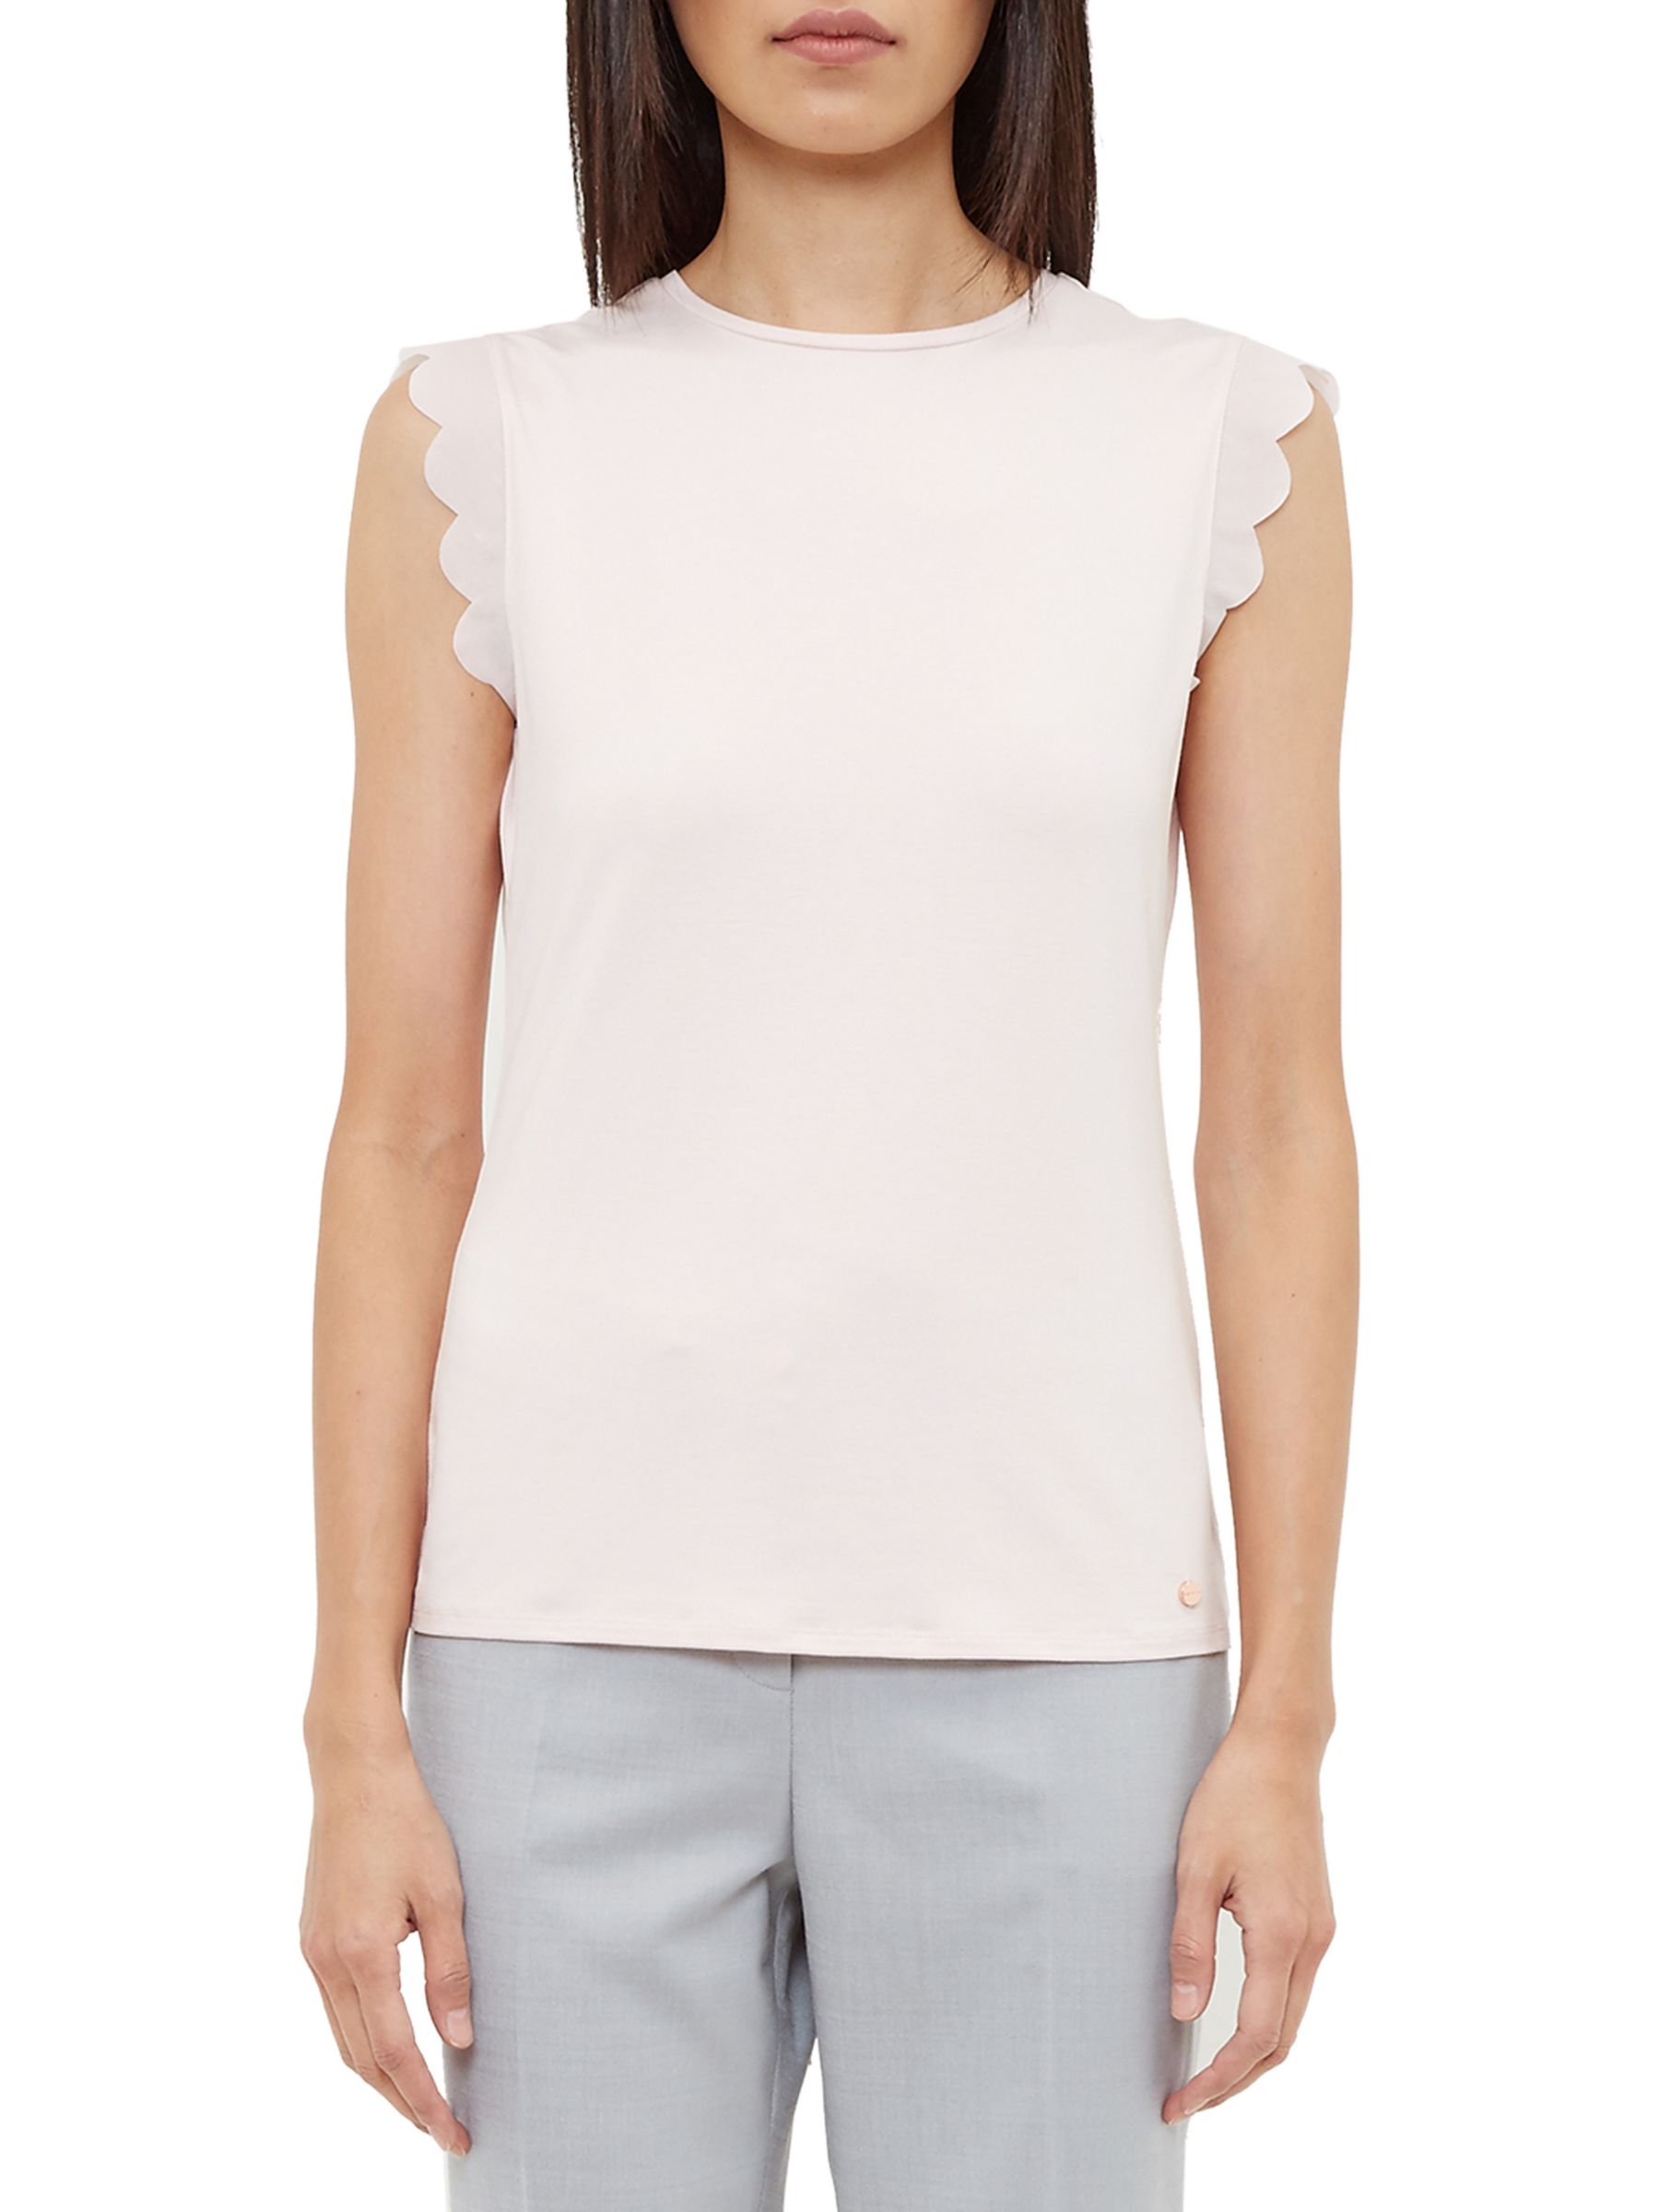 Ted Baker Scallop Detail T-Shirt, Dusty Pink